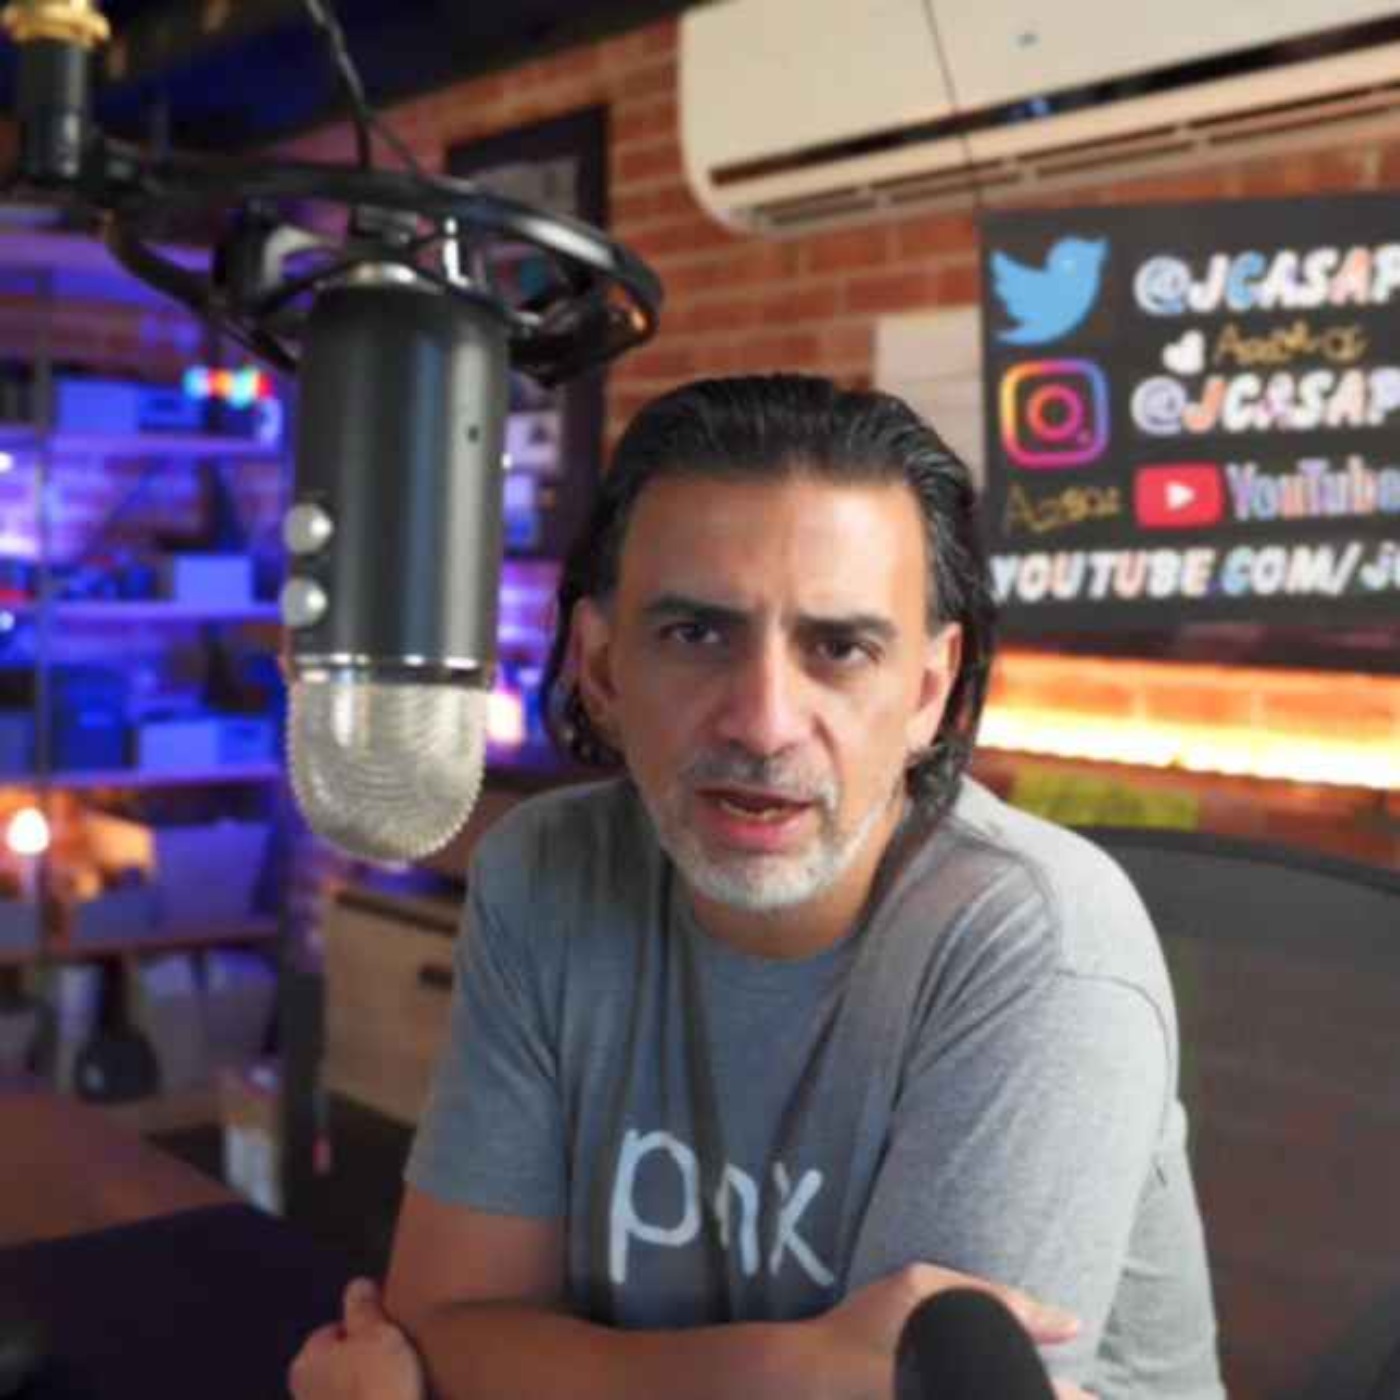 393: Jaime Casap, part 2: If a global pandemic isn't the end, what is?